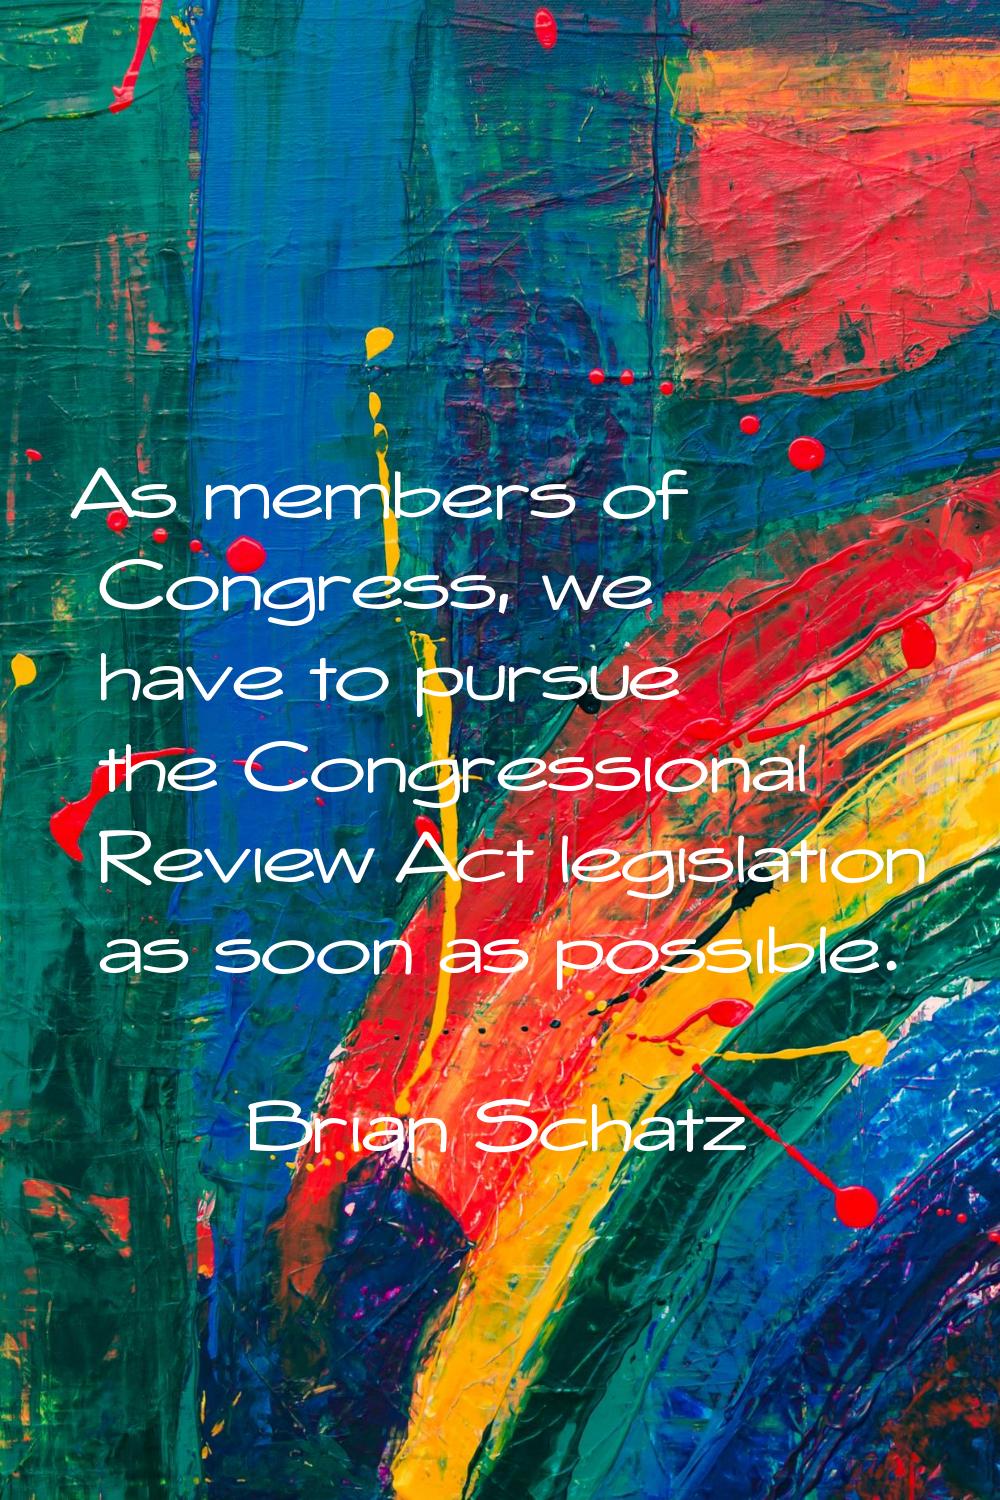 As members of Congress, we have to pursue the Congressional Review Act legislation as soon as possi